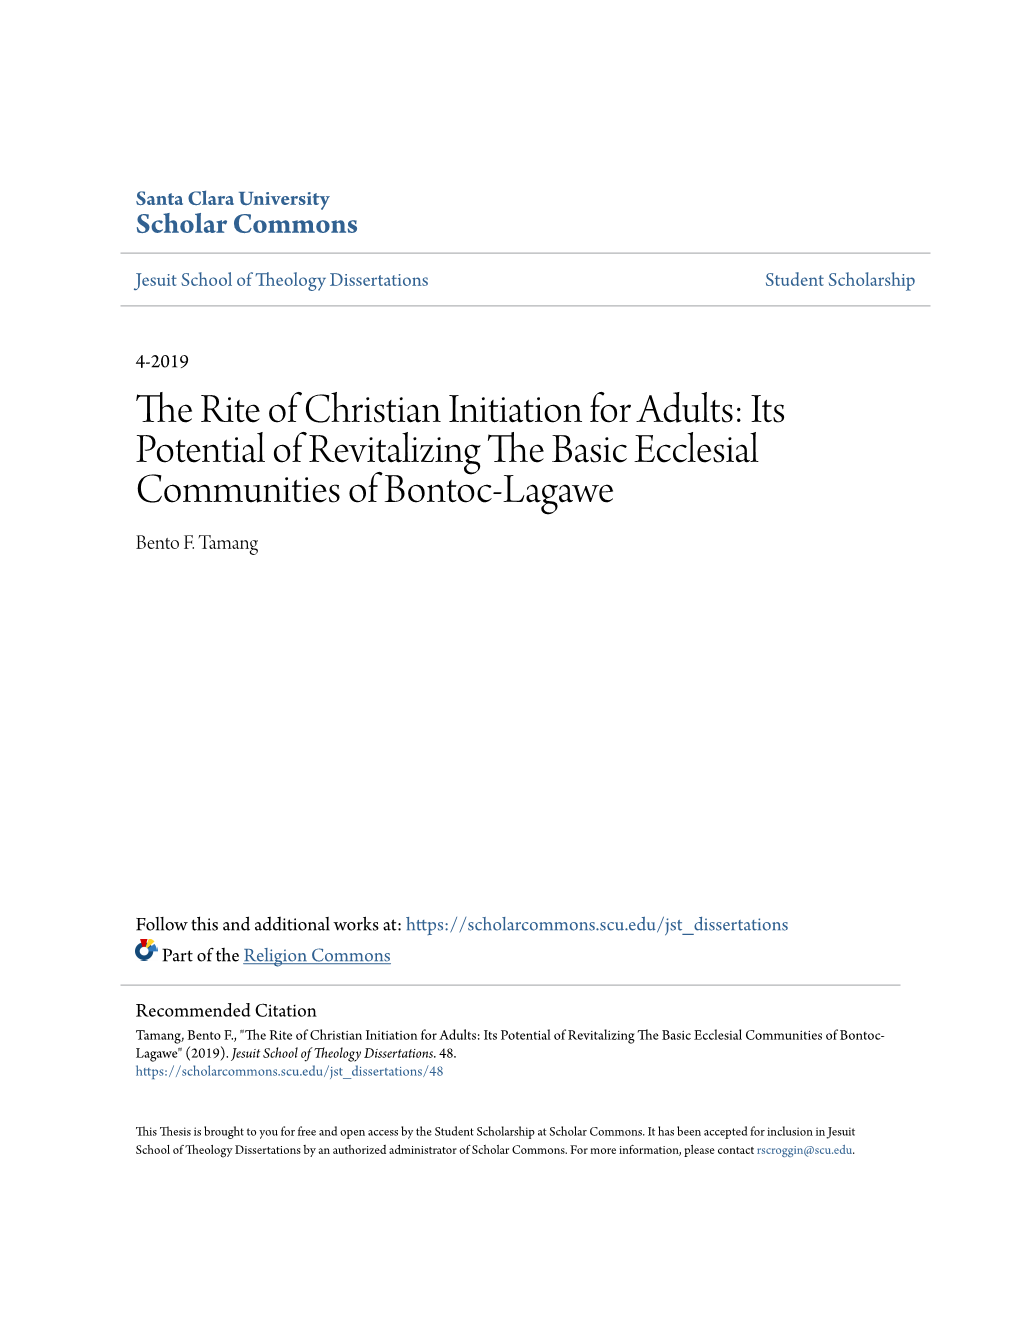 The Rite of Christian Initiation for Adults: Its Potential of Revitalizing the Basic Ecclesial Communities of Bontoc-Lagawe